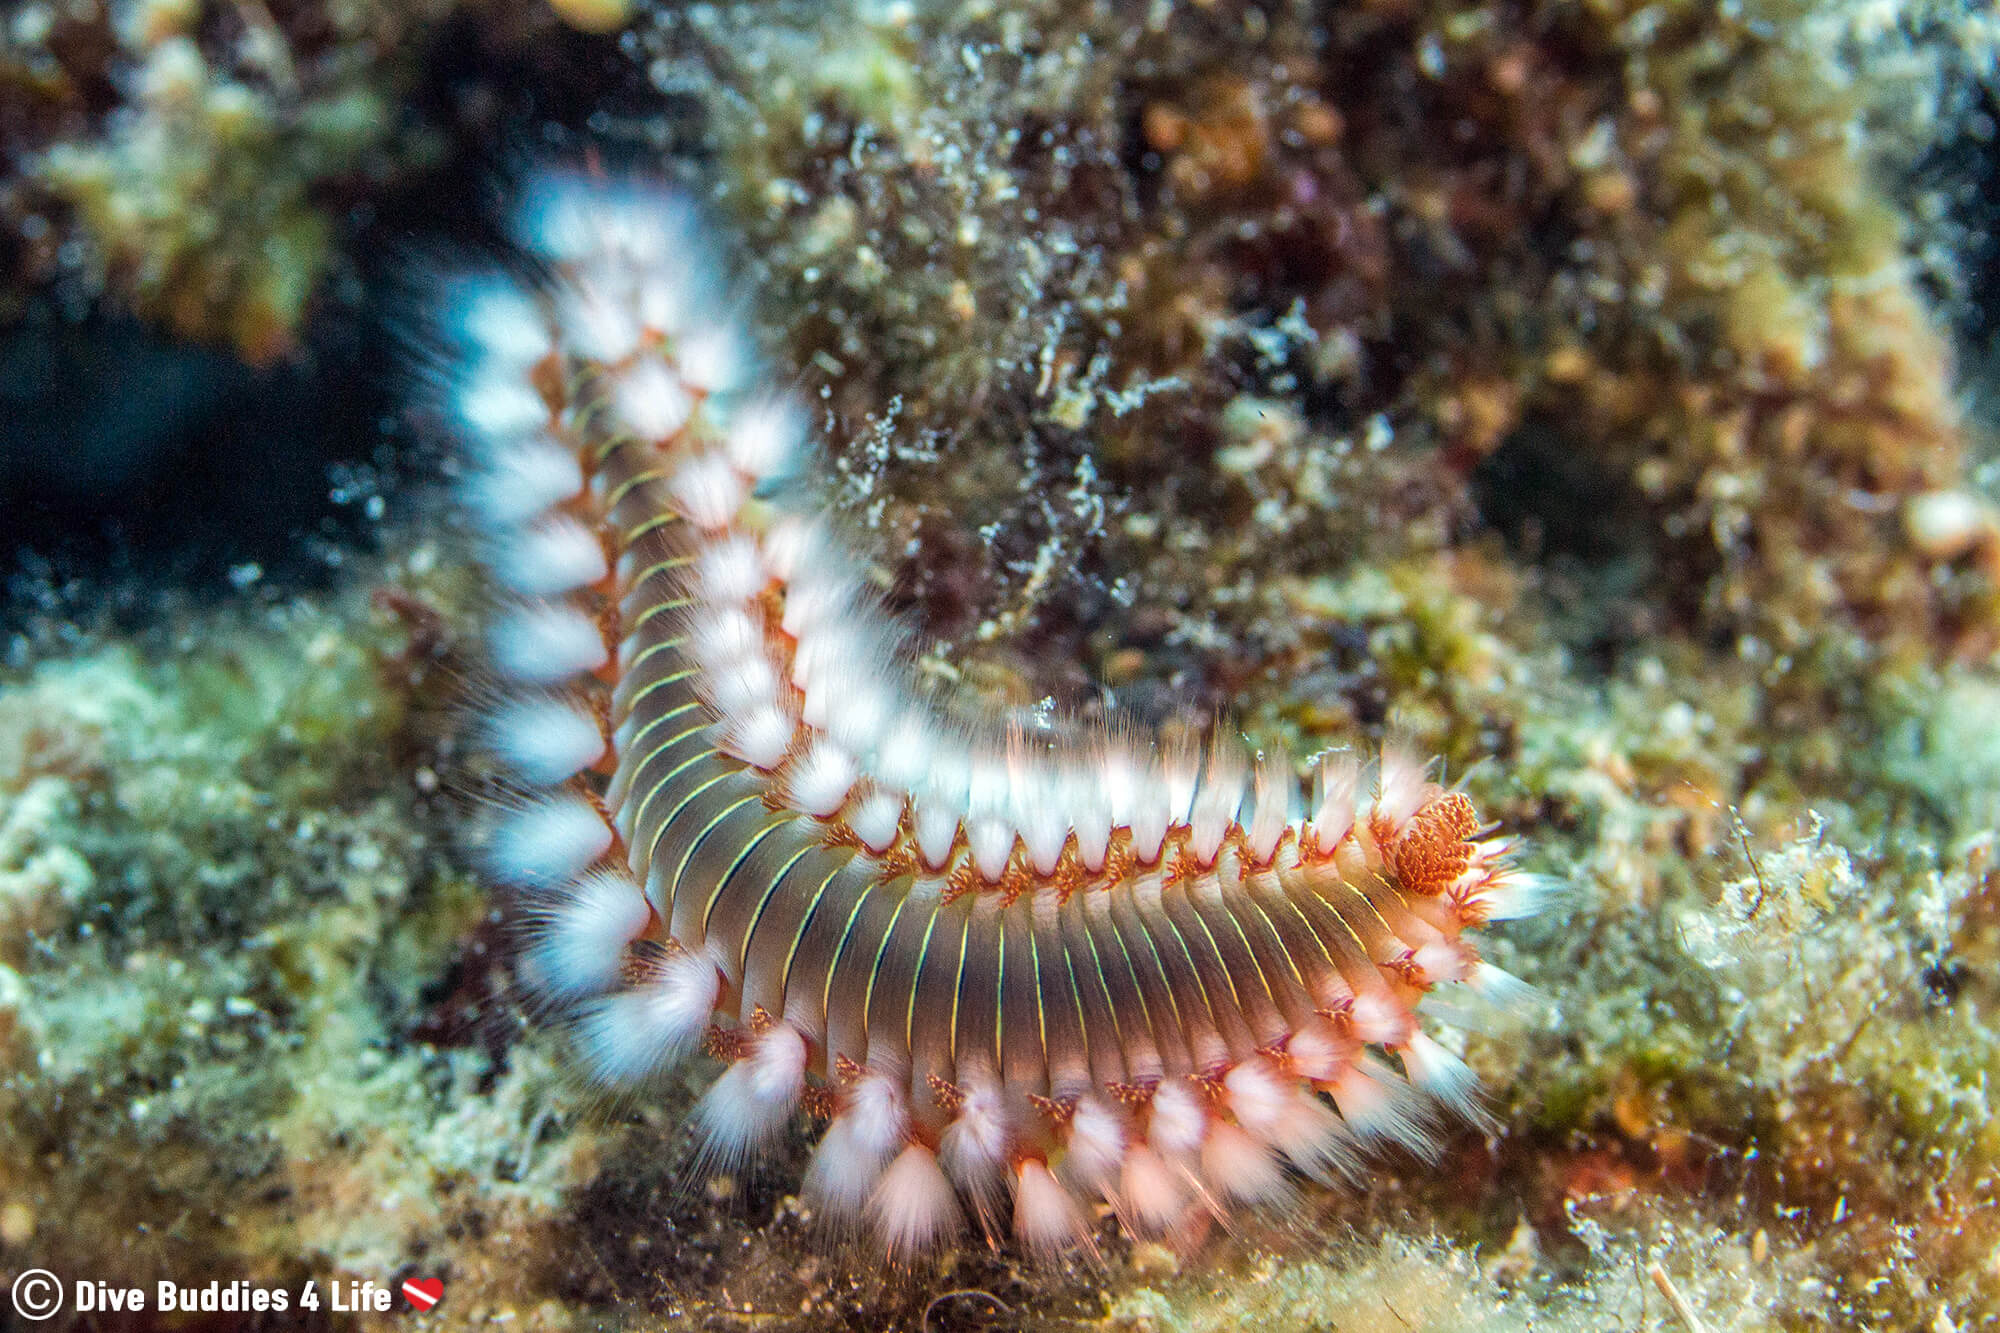 A Fire worm Emerging From The Plant Life Underwater In Sarandë, Albania, Europe's Balkan Country